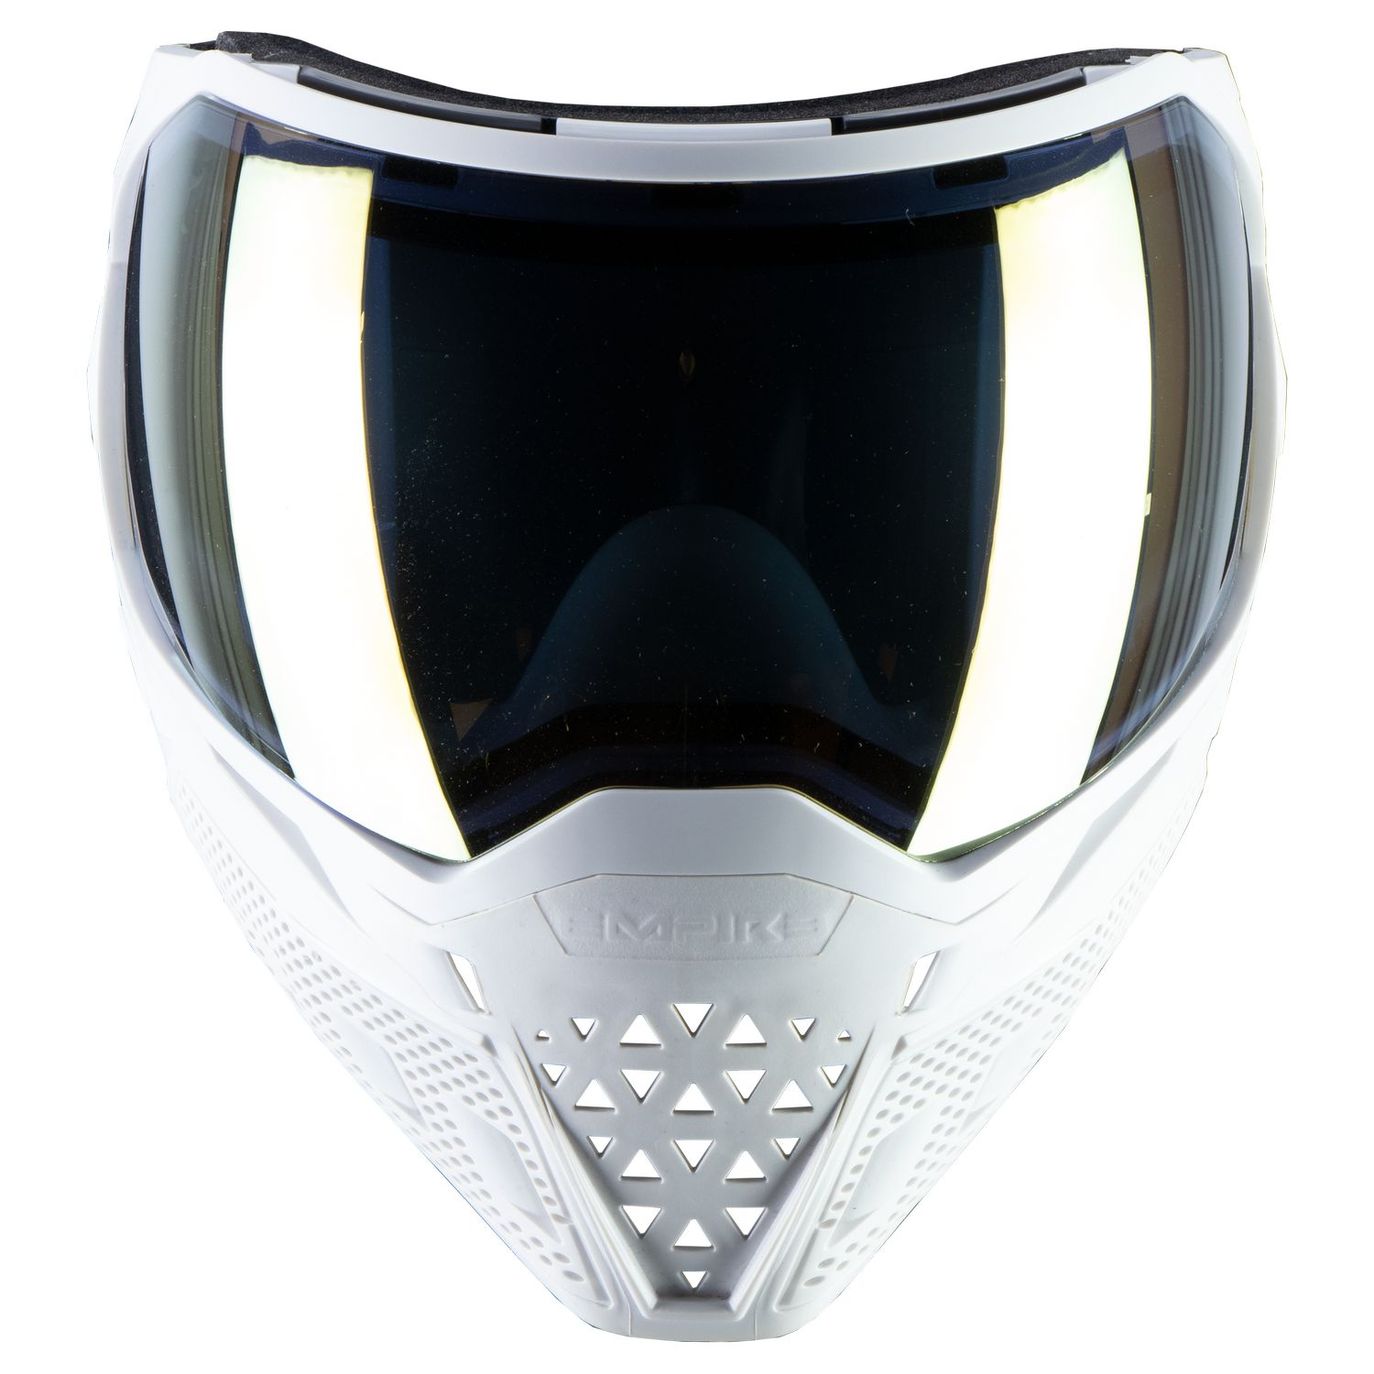 Empire EVS Paintball Goggle - White / Gold